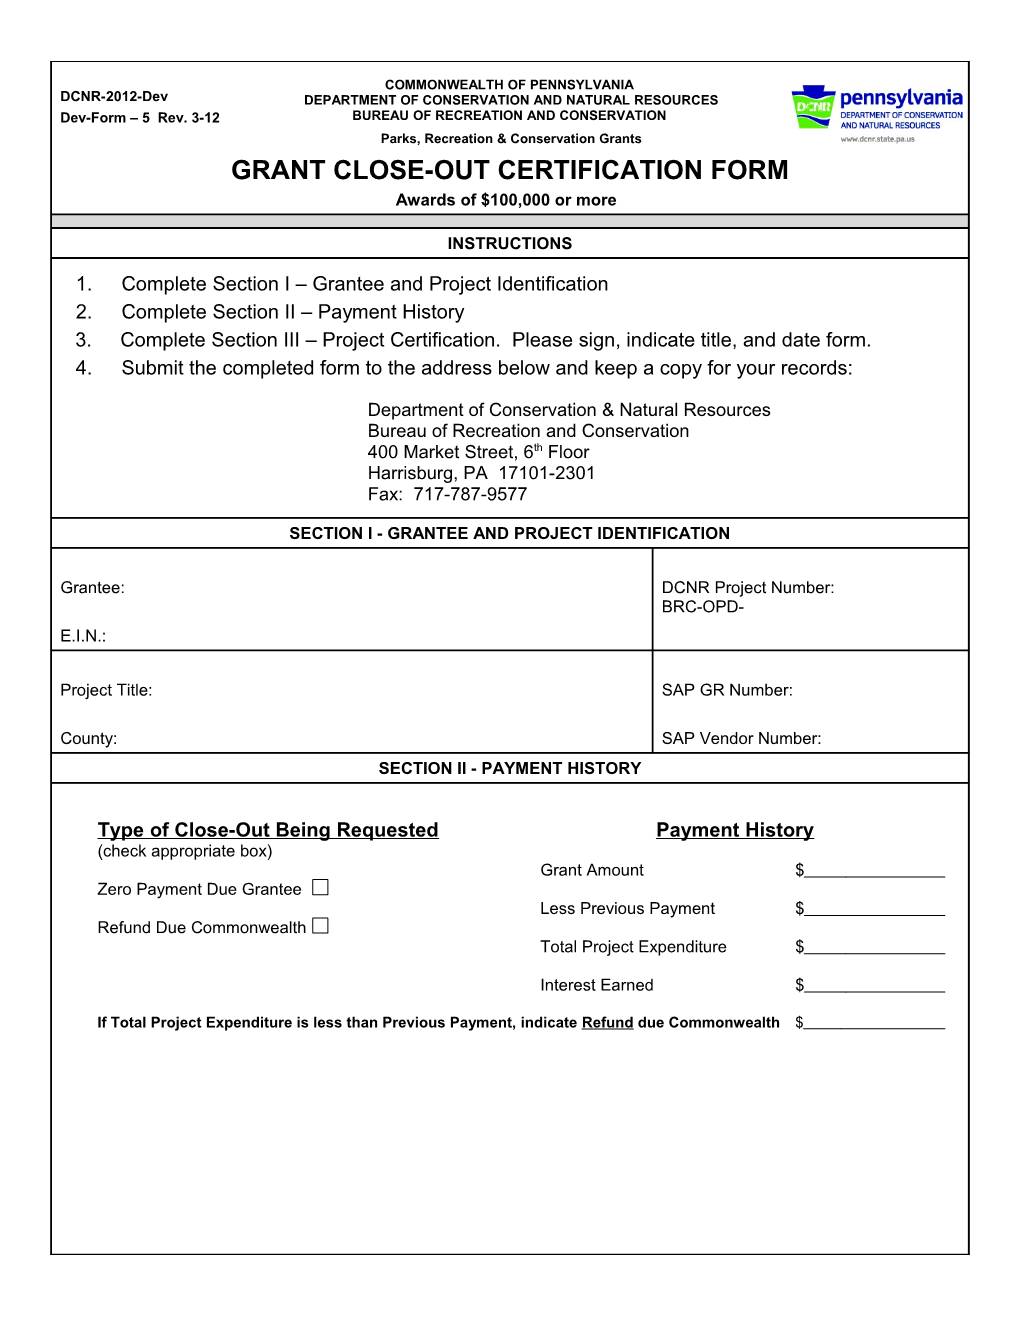 Grant Close-Out Certification Form